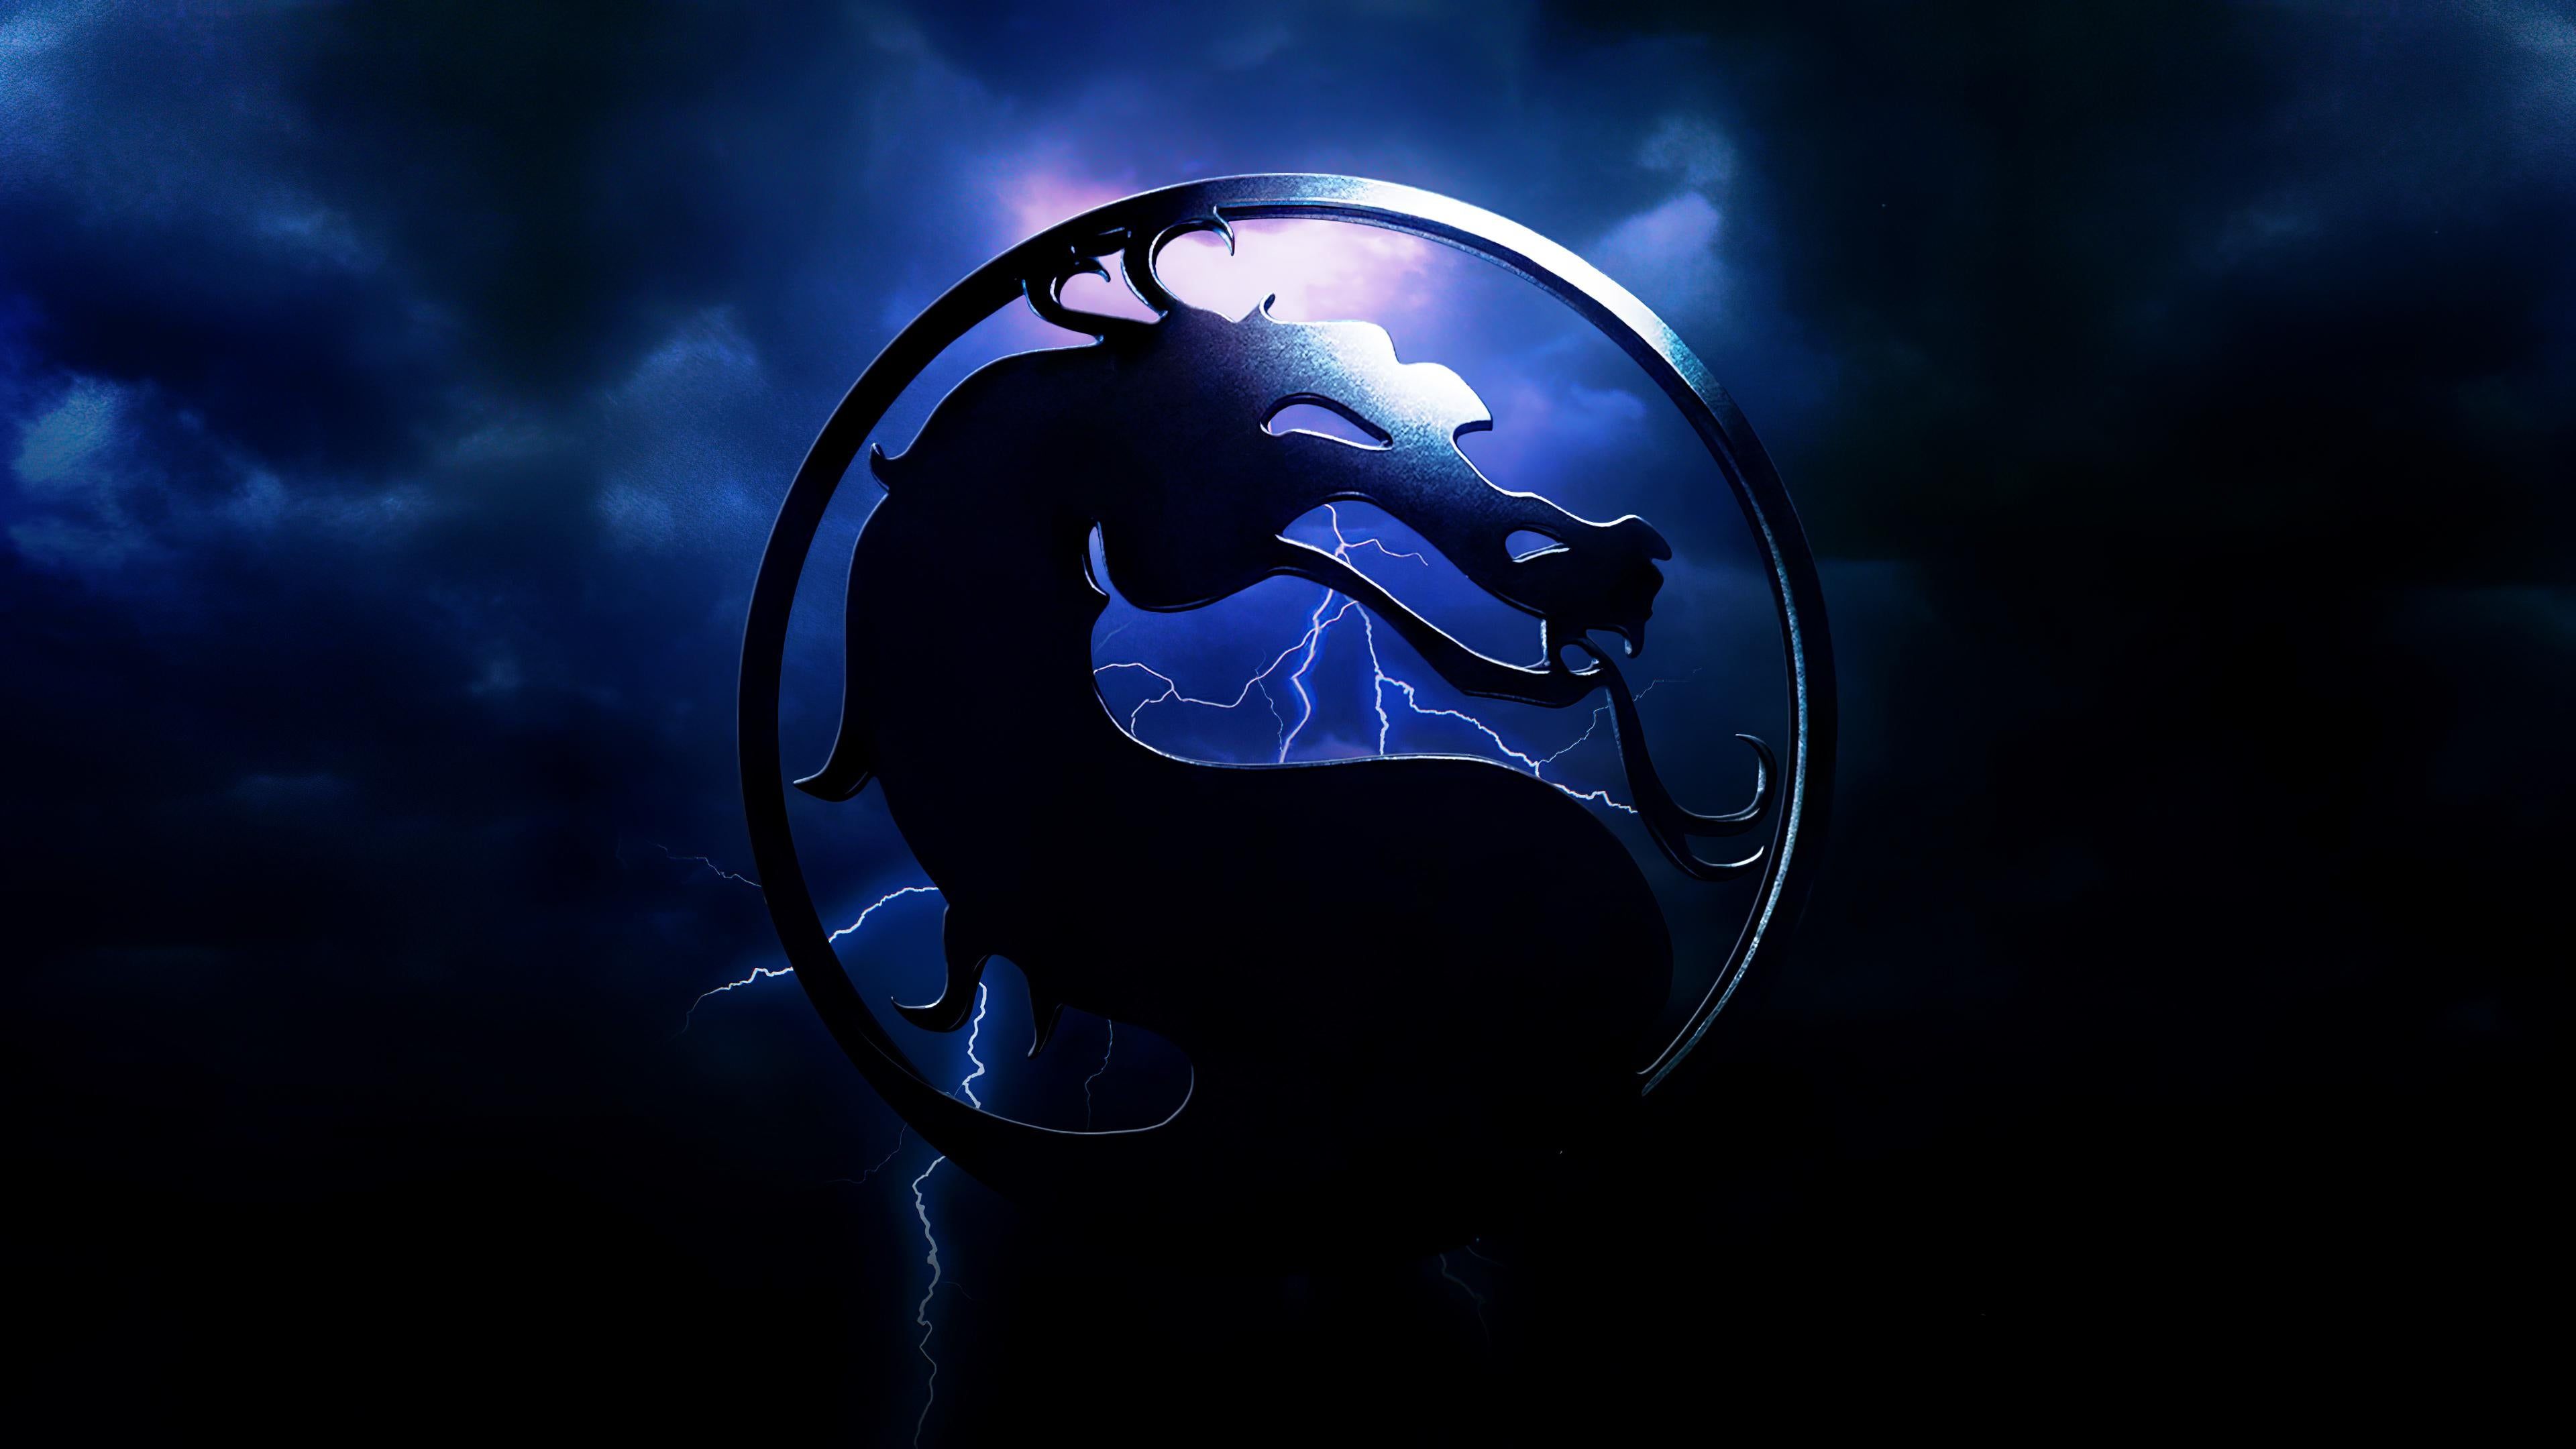 MK2 Fan HD Wallpaper. Made By Editing Together Official Pics Posters. Just Wanted To Share It.: MortalKombat